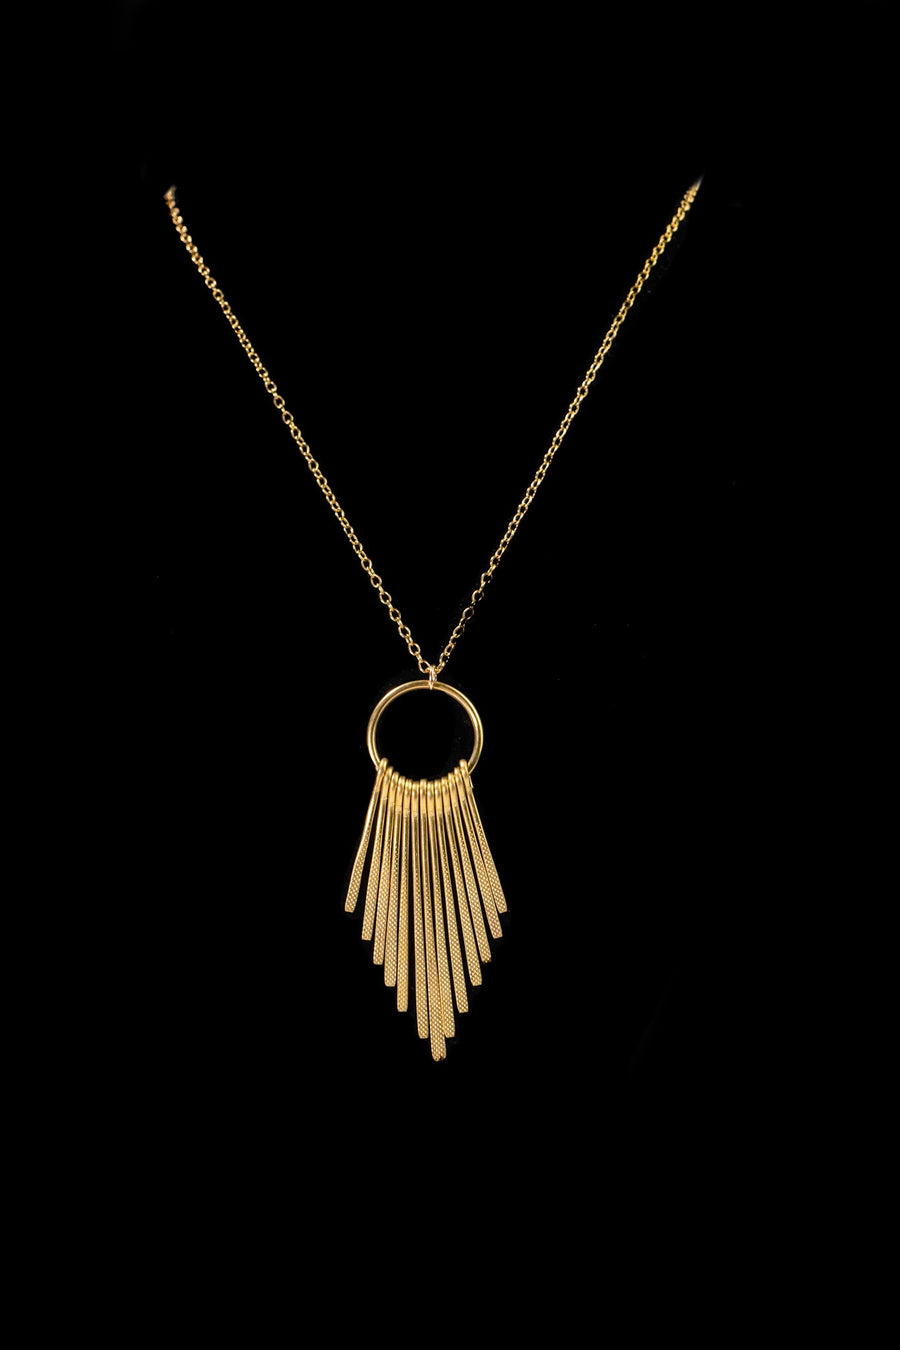 Fringe Pendant Necklace (Brass) by Lace & Pearls Jewelry